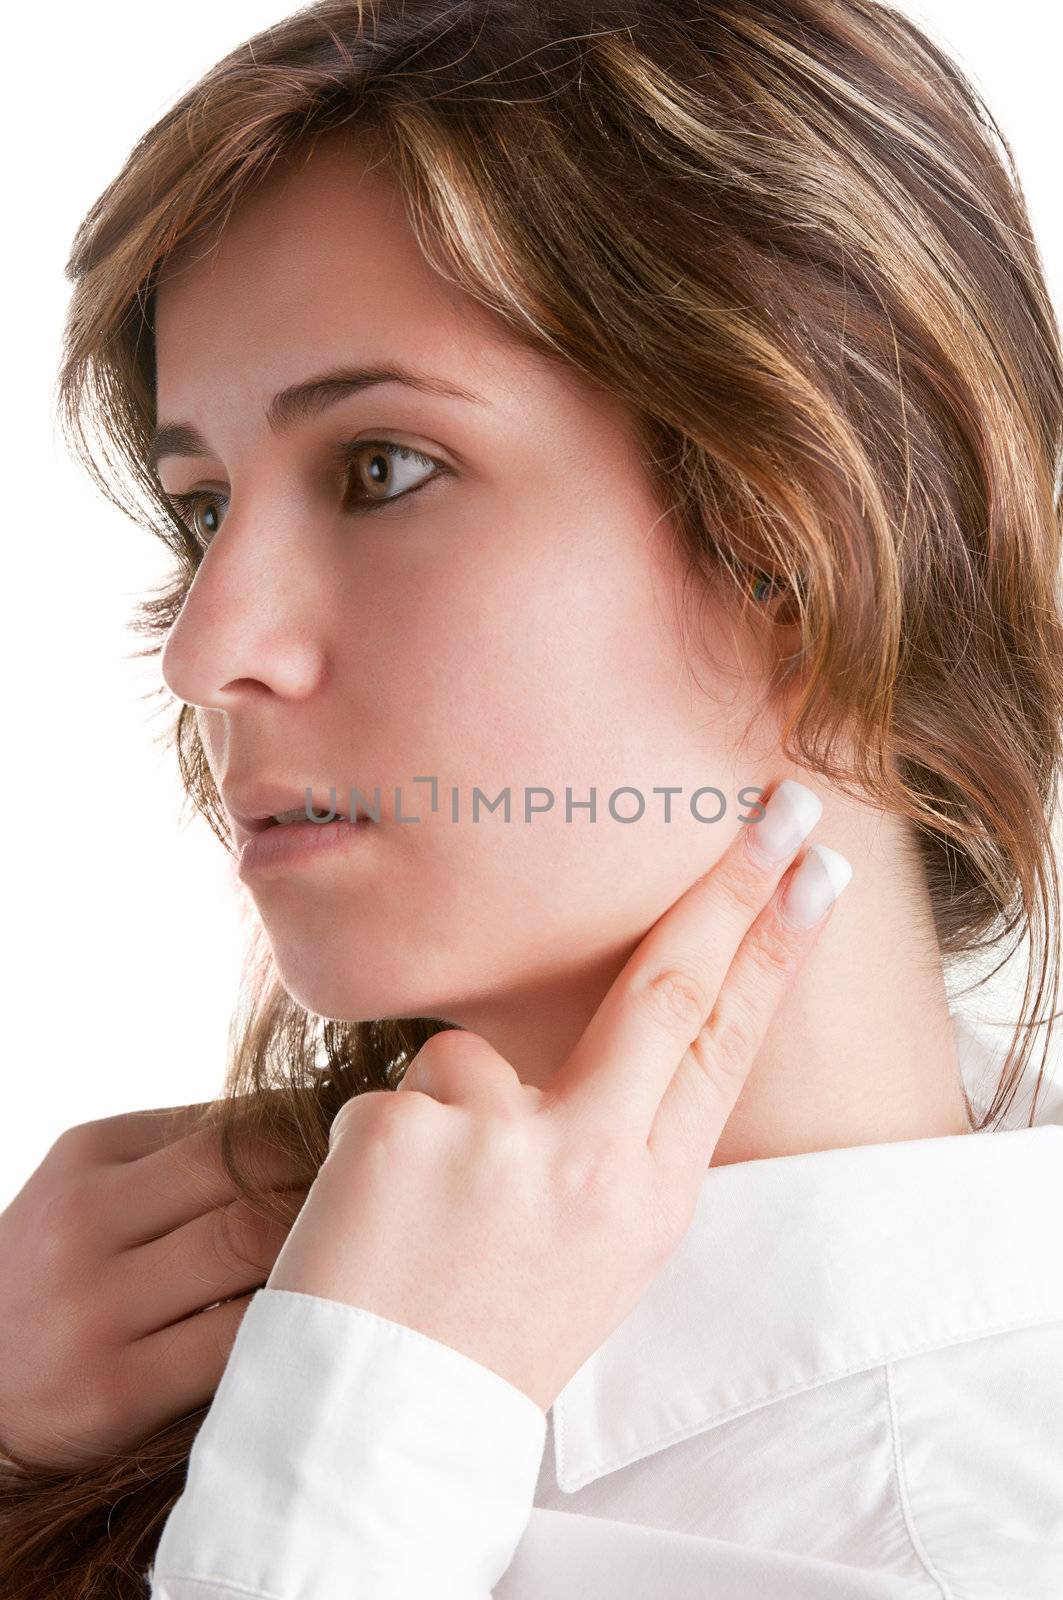 Woman checking her heart heart rate holding her fingers to her neck, isolated in white